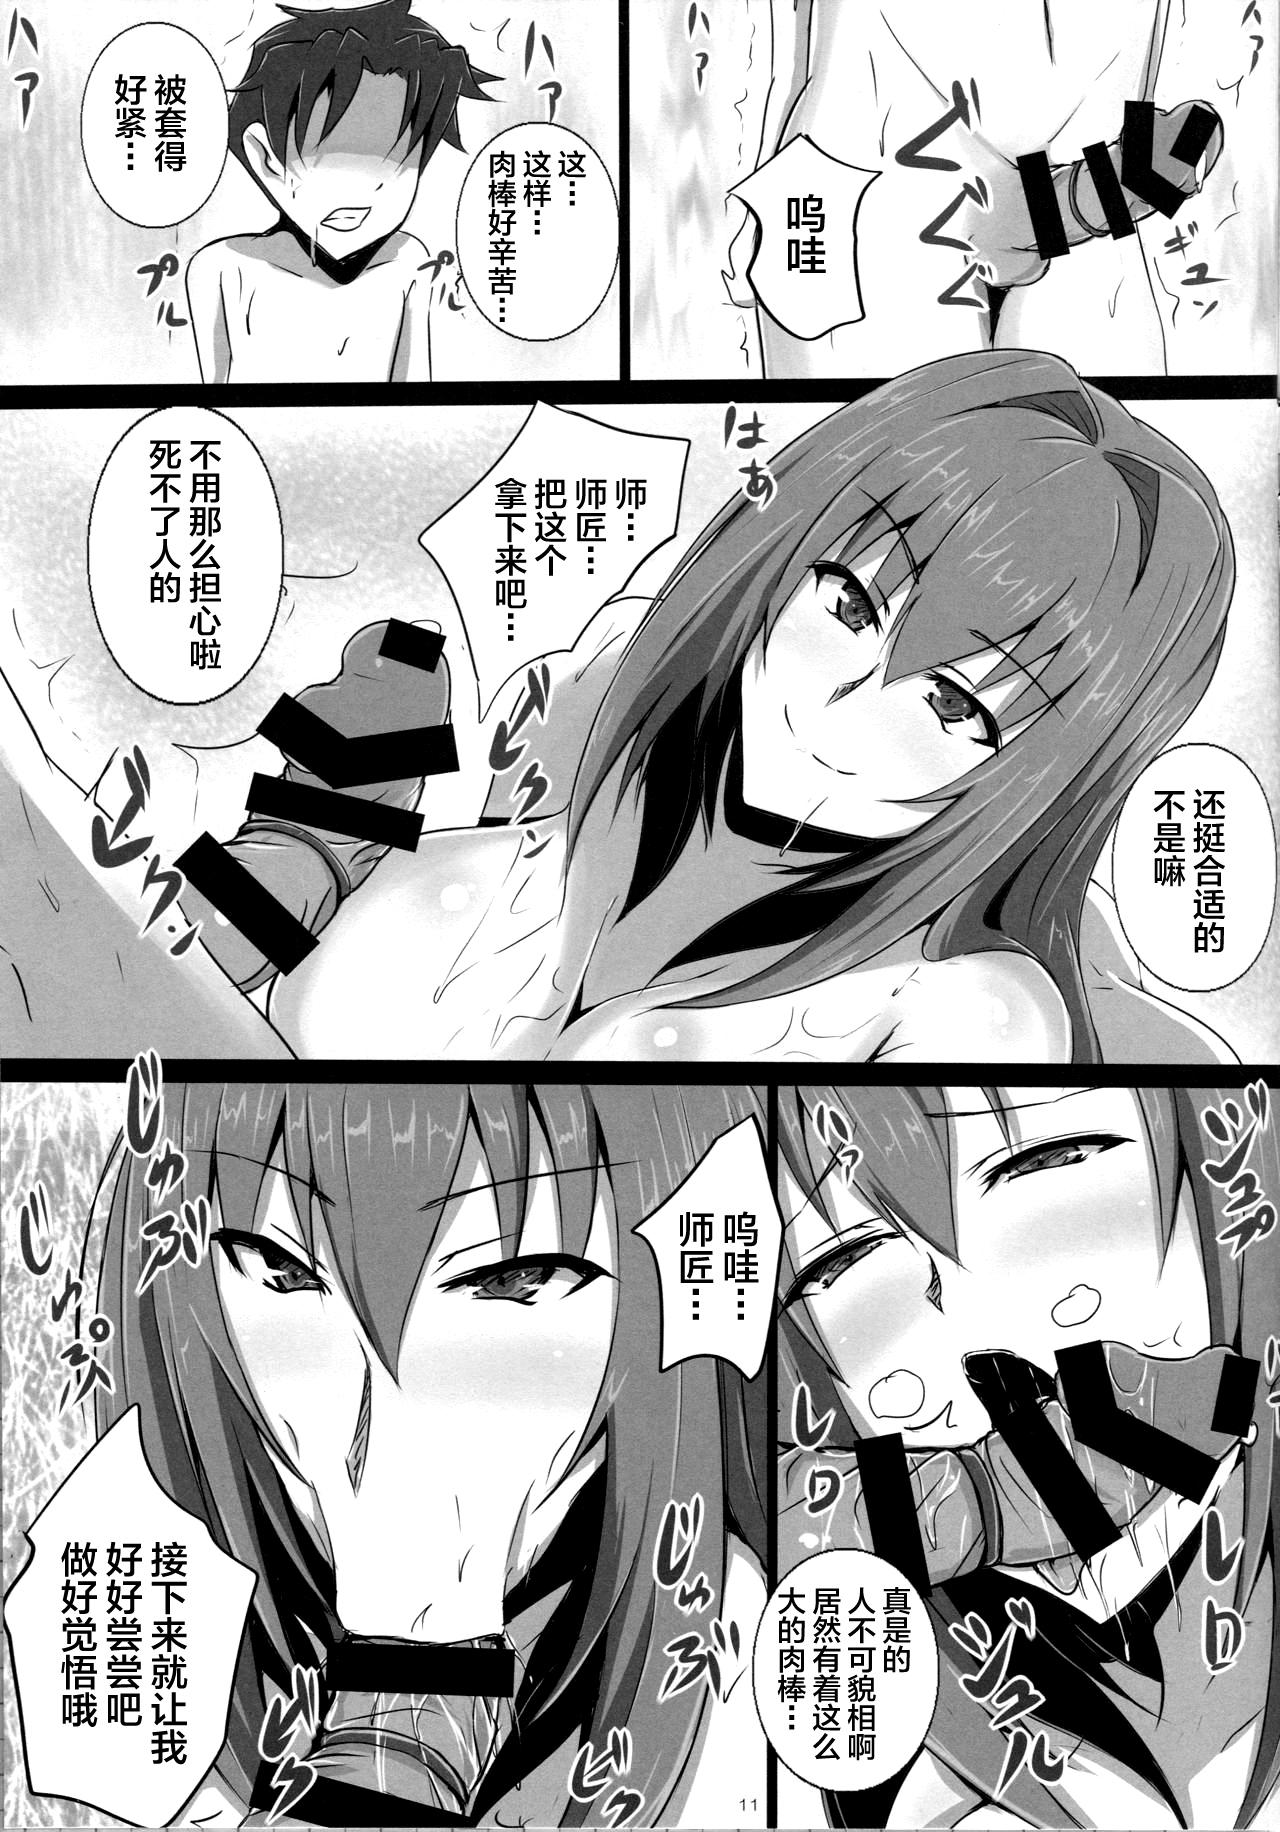 Ameture Porn Scathach Shishou no Celt Shiki SEX Training - Fate grand order Nerd - Page 10